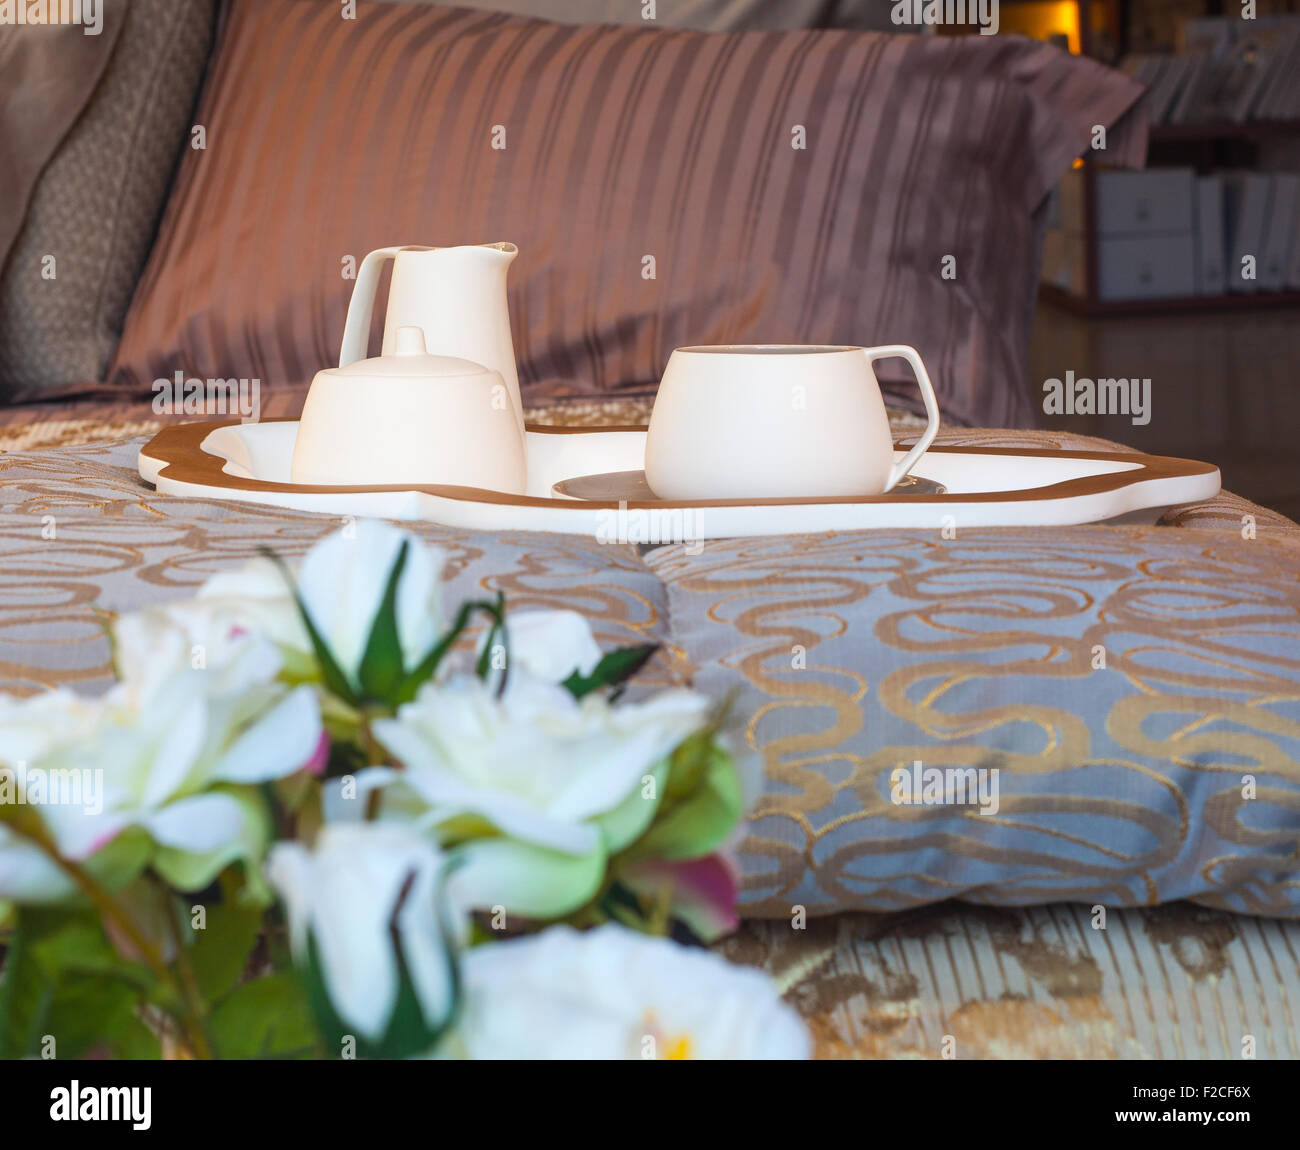 Flatware and white flowers on the bed Stock Photo